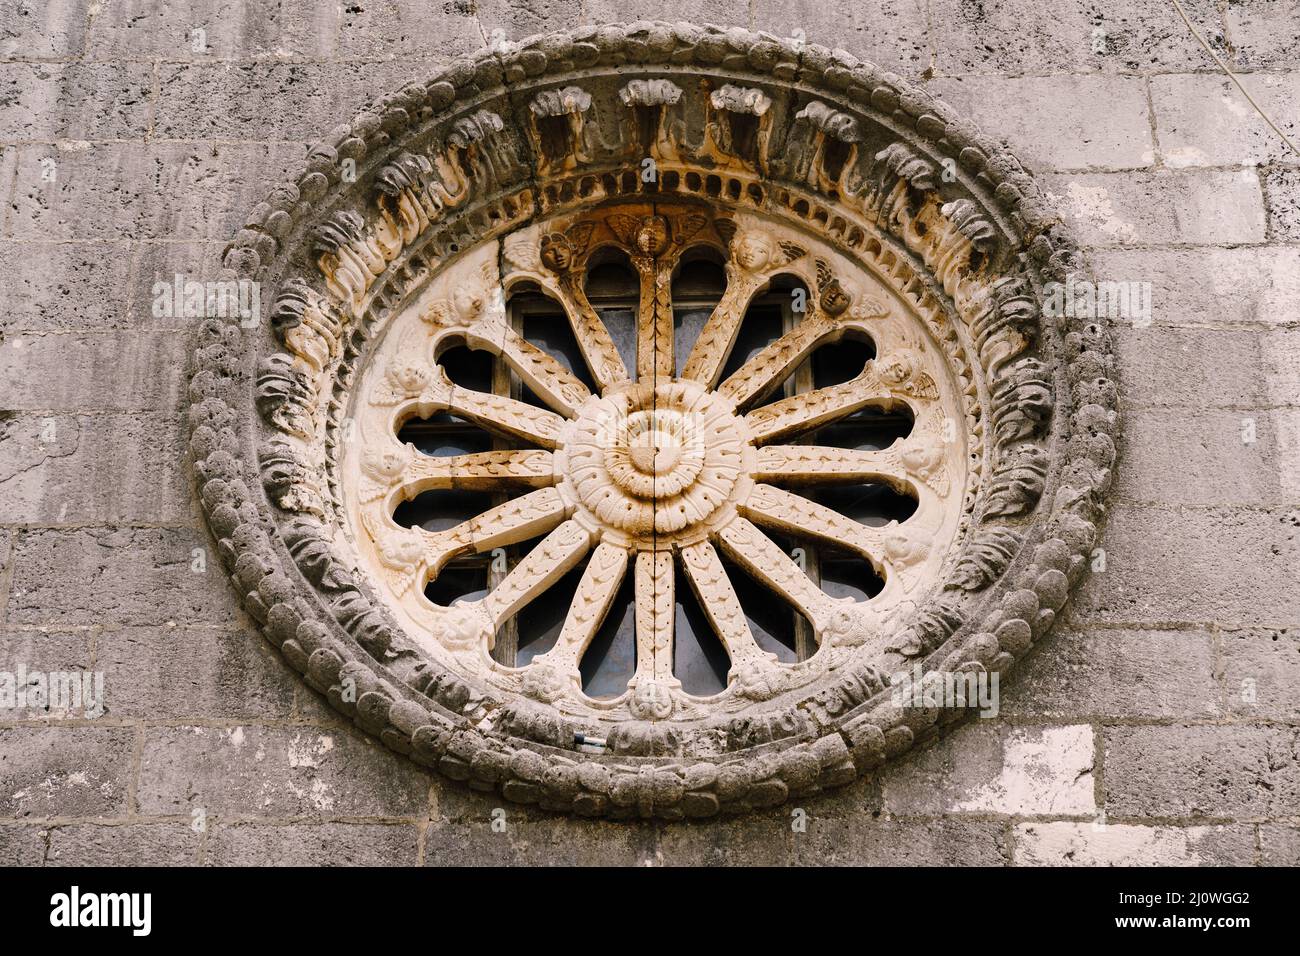 Rose window with ornaments and patterns on the dark stone wall of the church Stock Photo